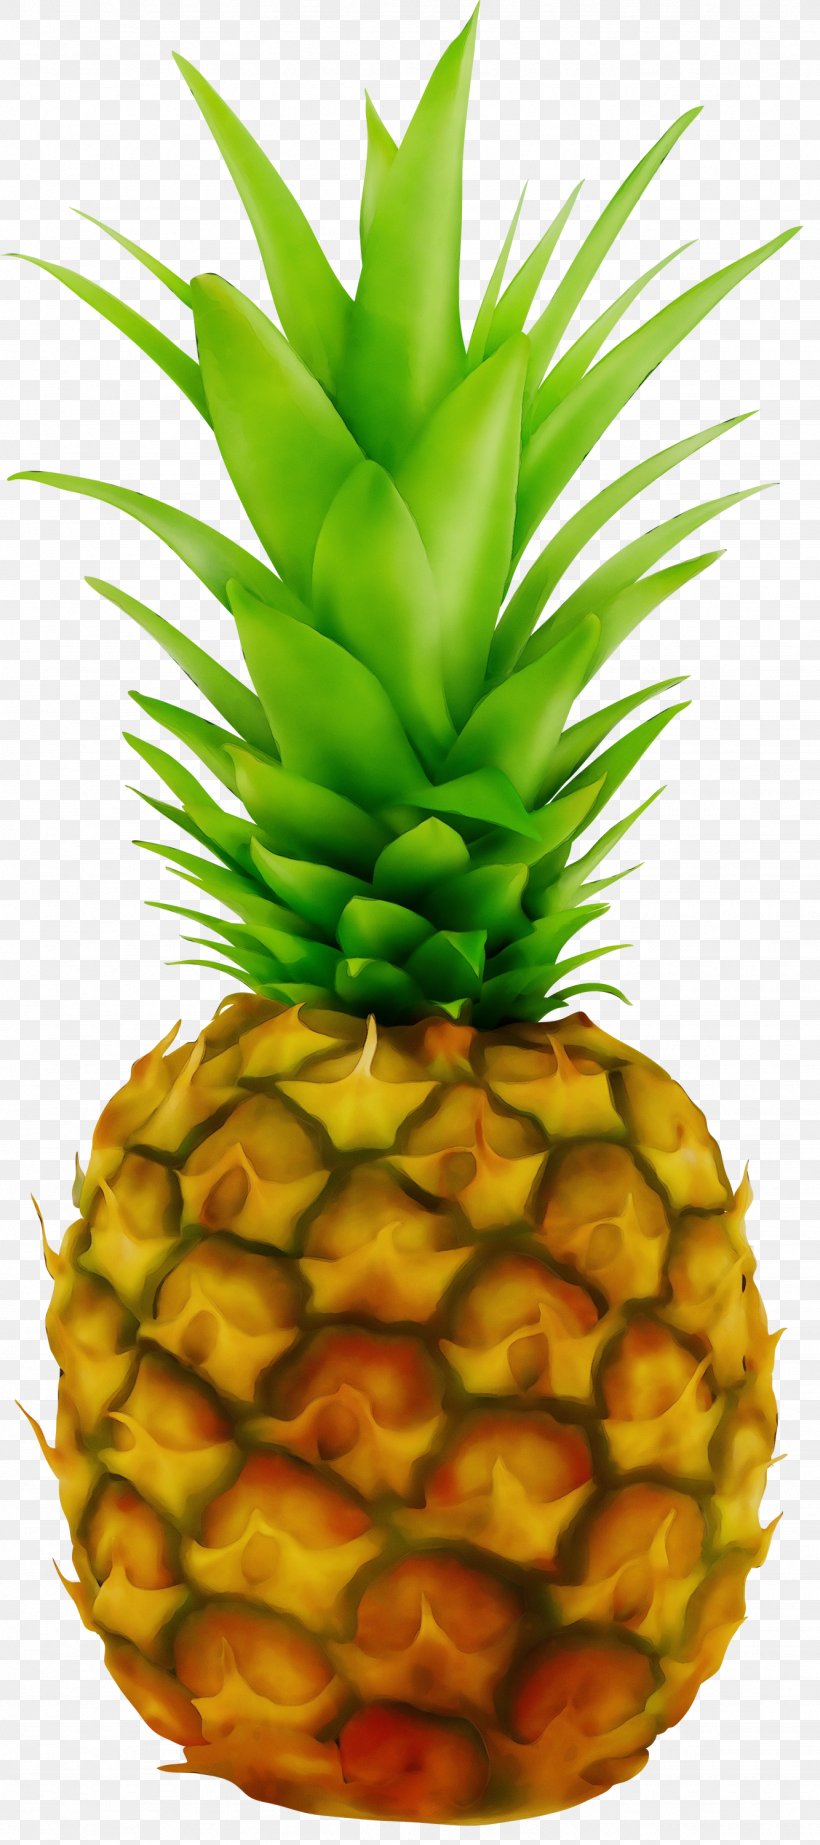 Pineapple Punch Juice Clip Art, PNG, 1333x3000px, Pineapple, Ananas ...